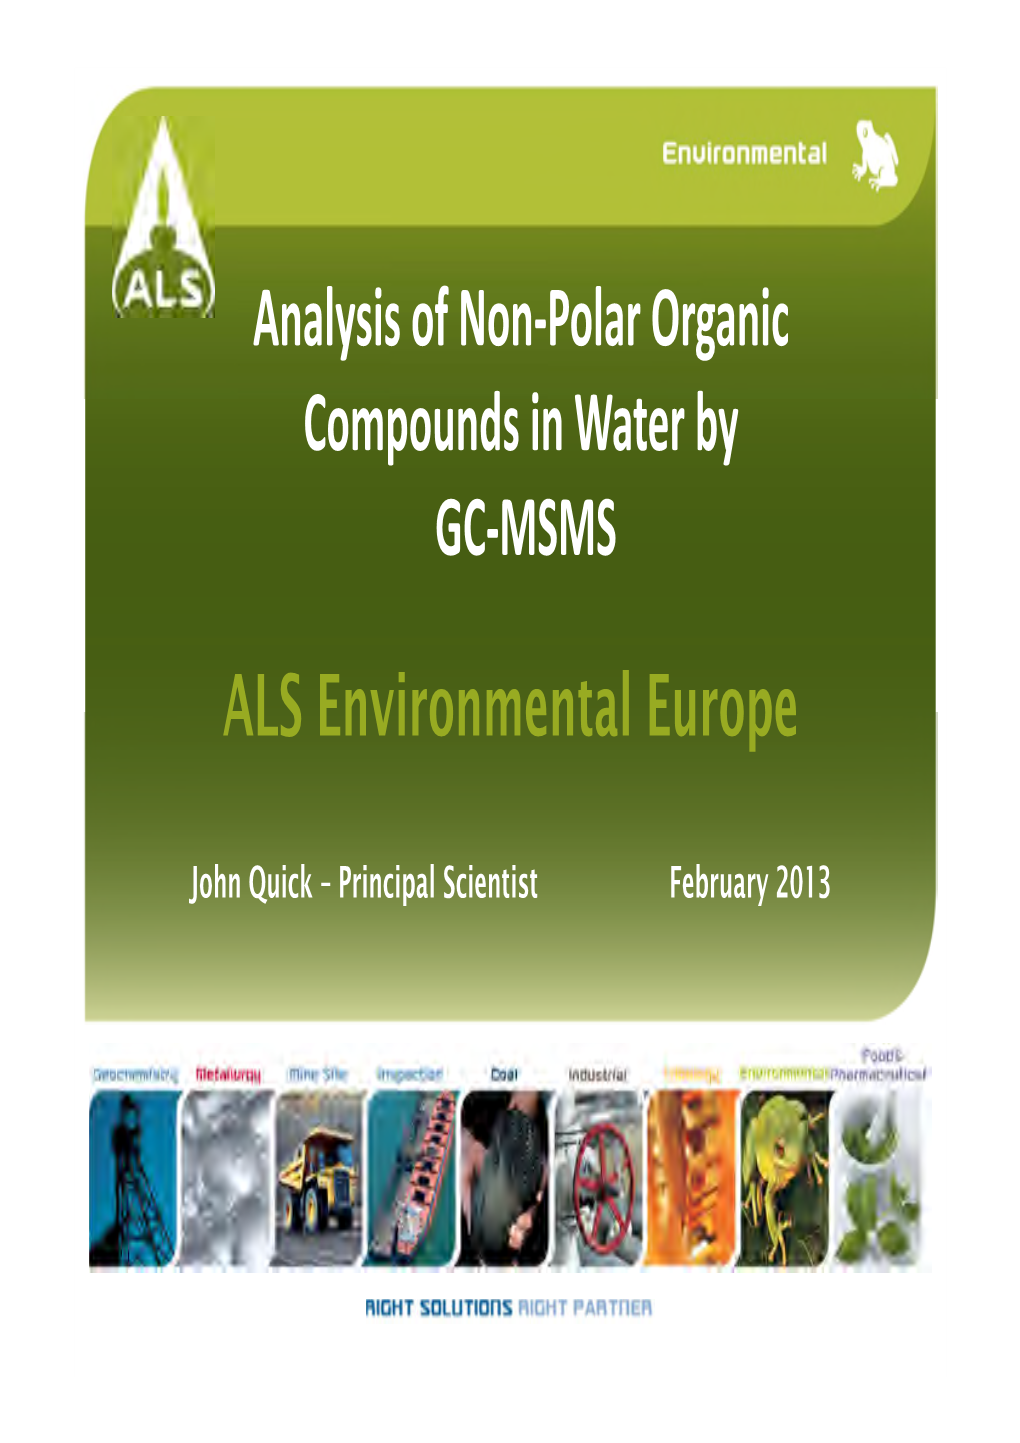 Analysis of Non-Polar Organic Compounds in Water by GC-MSMS